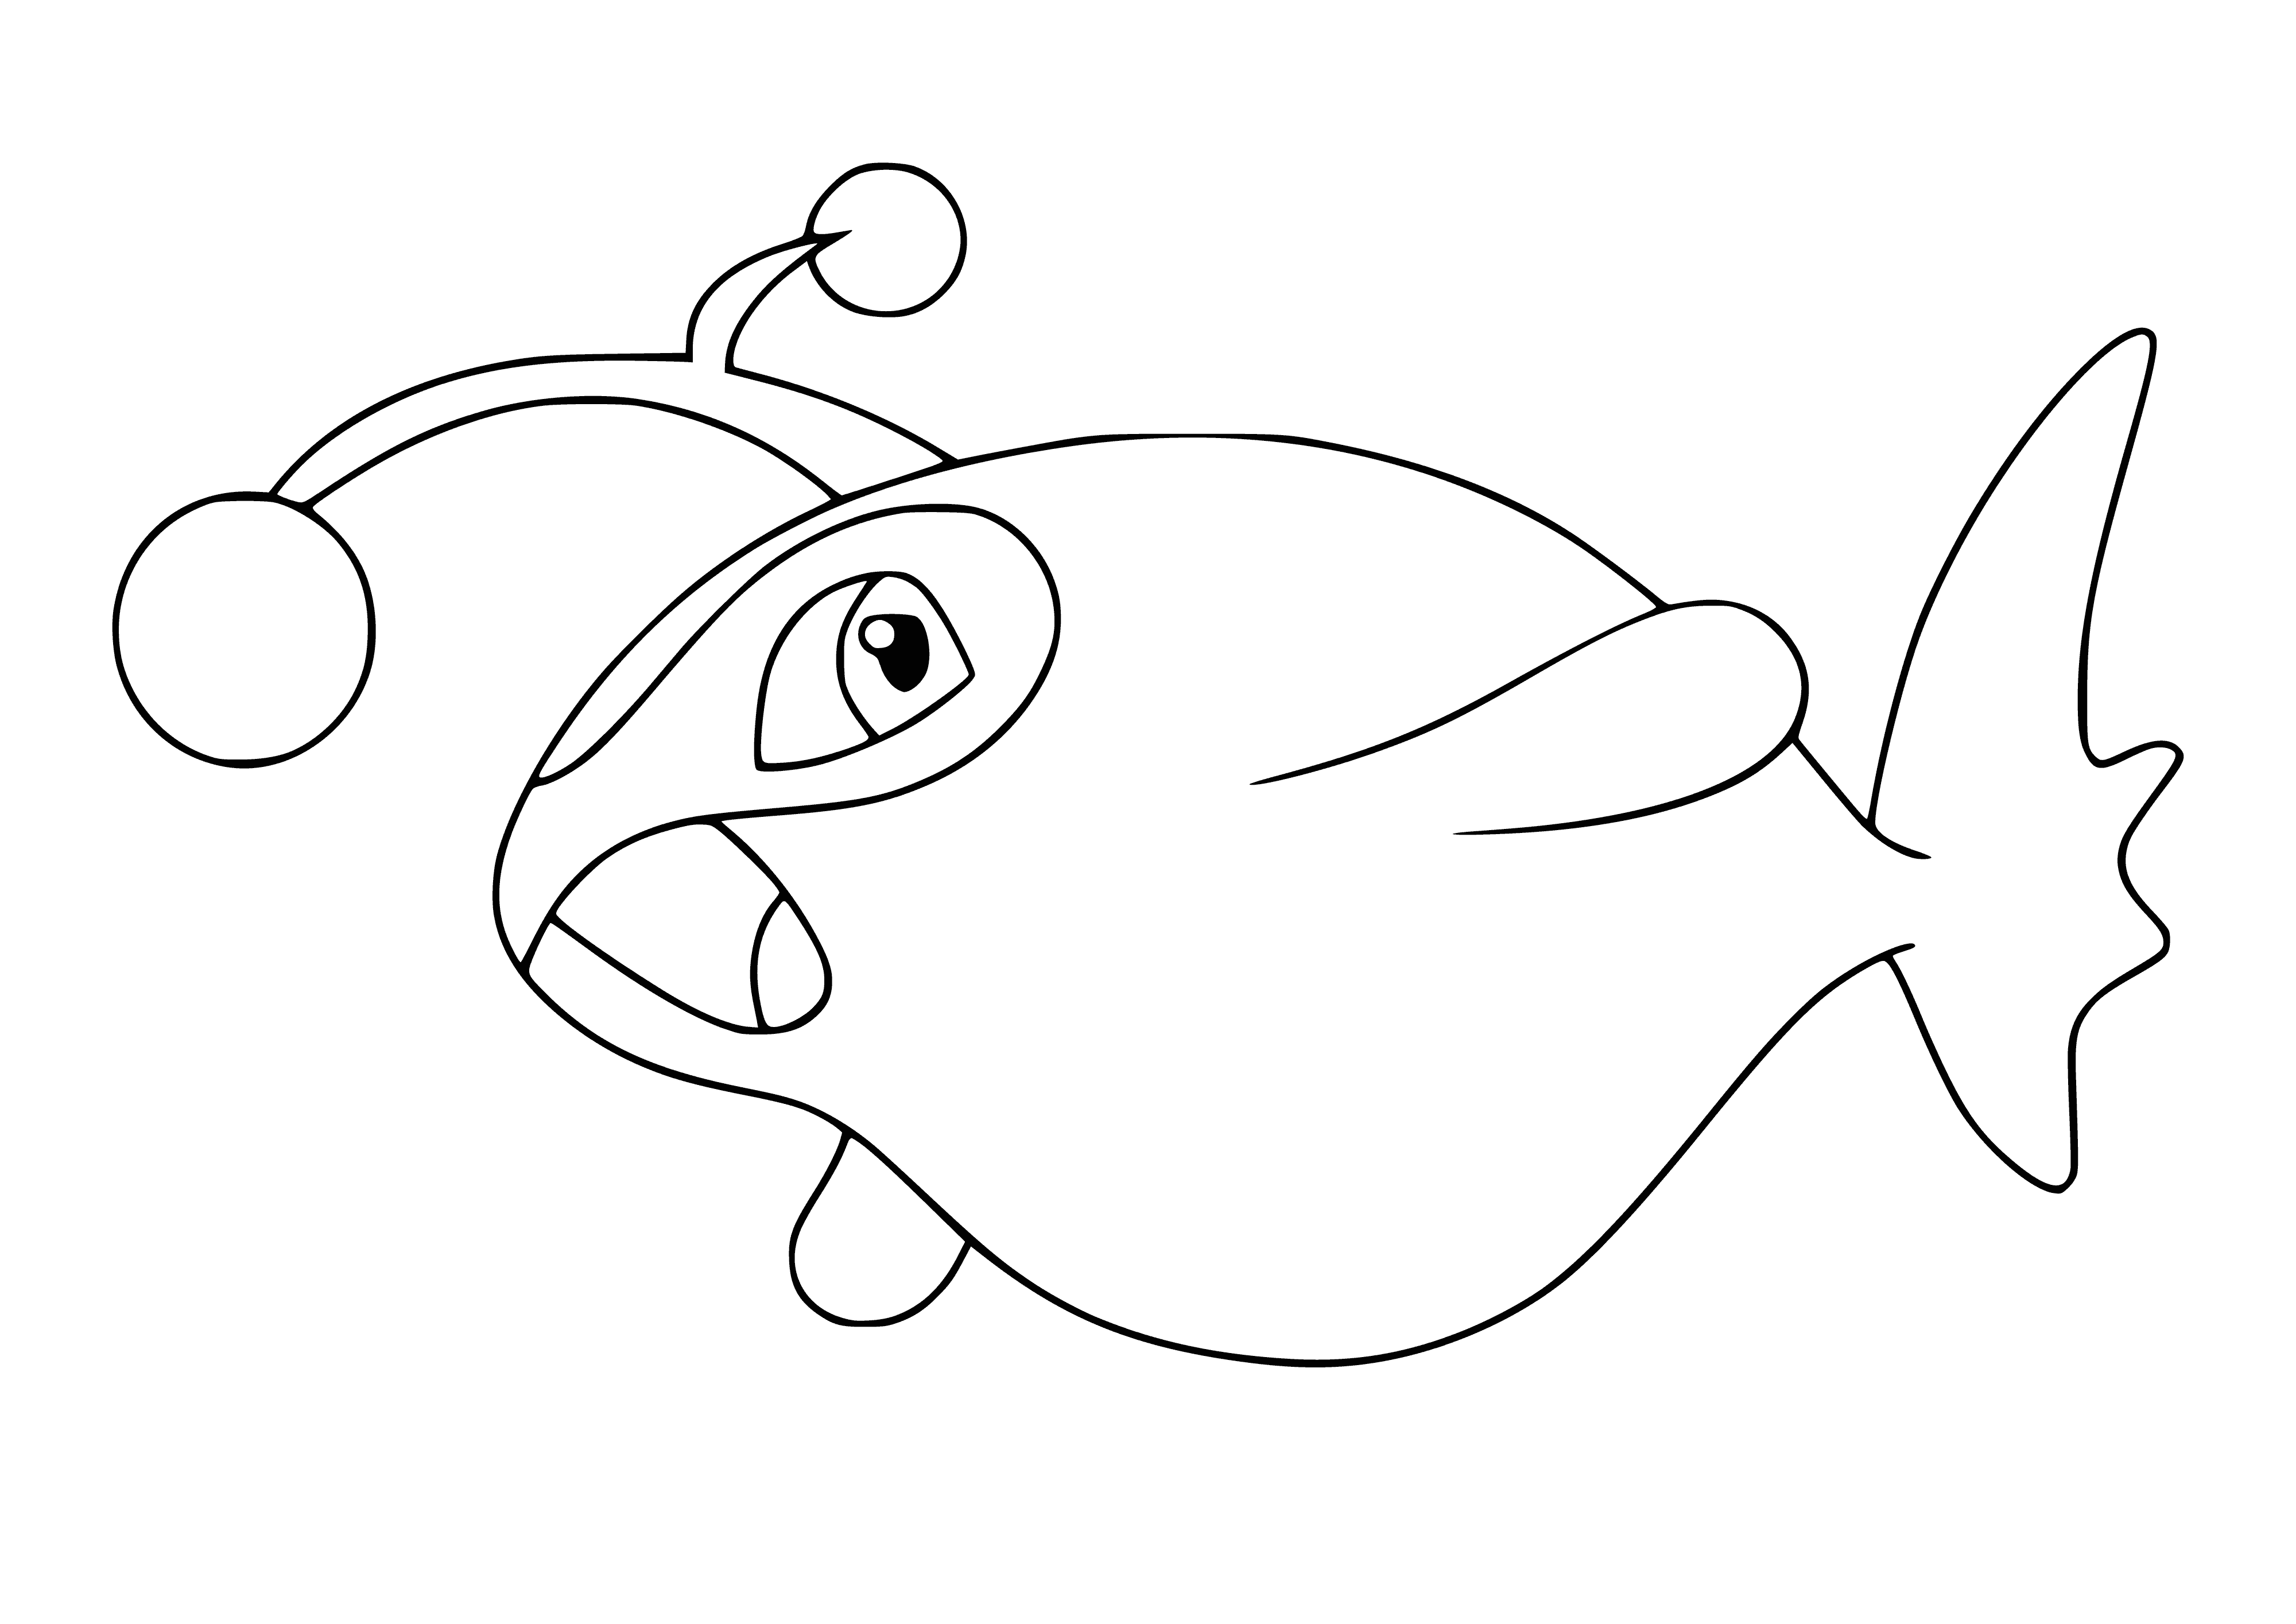 coloring page: Blue angelfish-like creature with yellow spots & long flowing fins & tail with yellow tip.